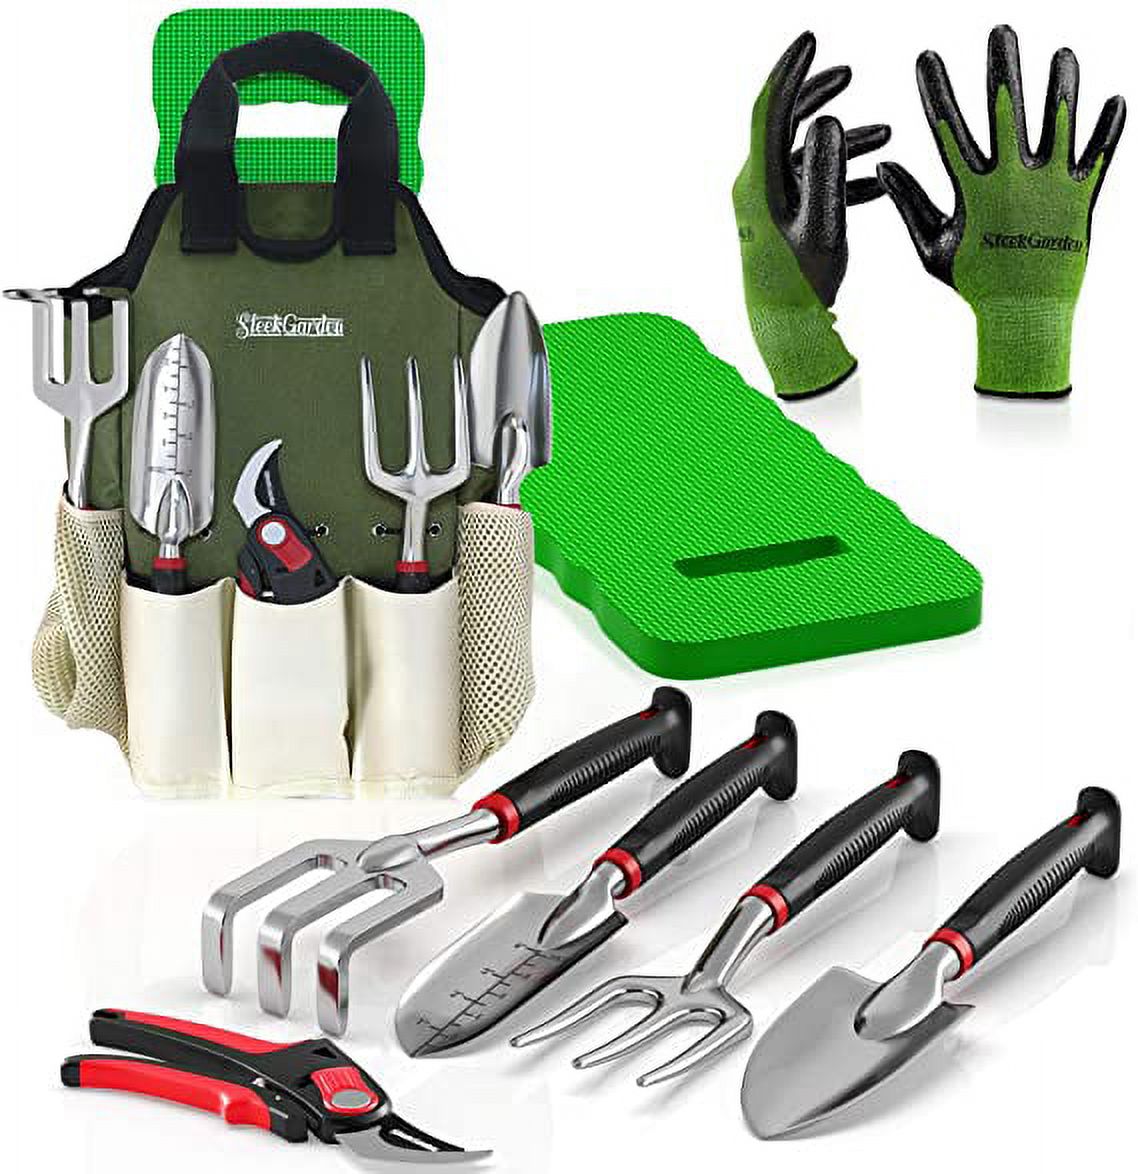 8-Piece Gardening Tool Set-Includes EZ-Cut Pruners, Lightweight Aluminum Hand Tools with Soft Rubber Handles- Trowel, Bamboo Gloves, Garden Tote, High Density Comfort Knee Pad Gardening Gifts Tool Set - image 1 of 7